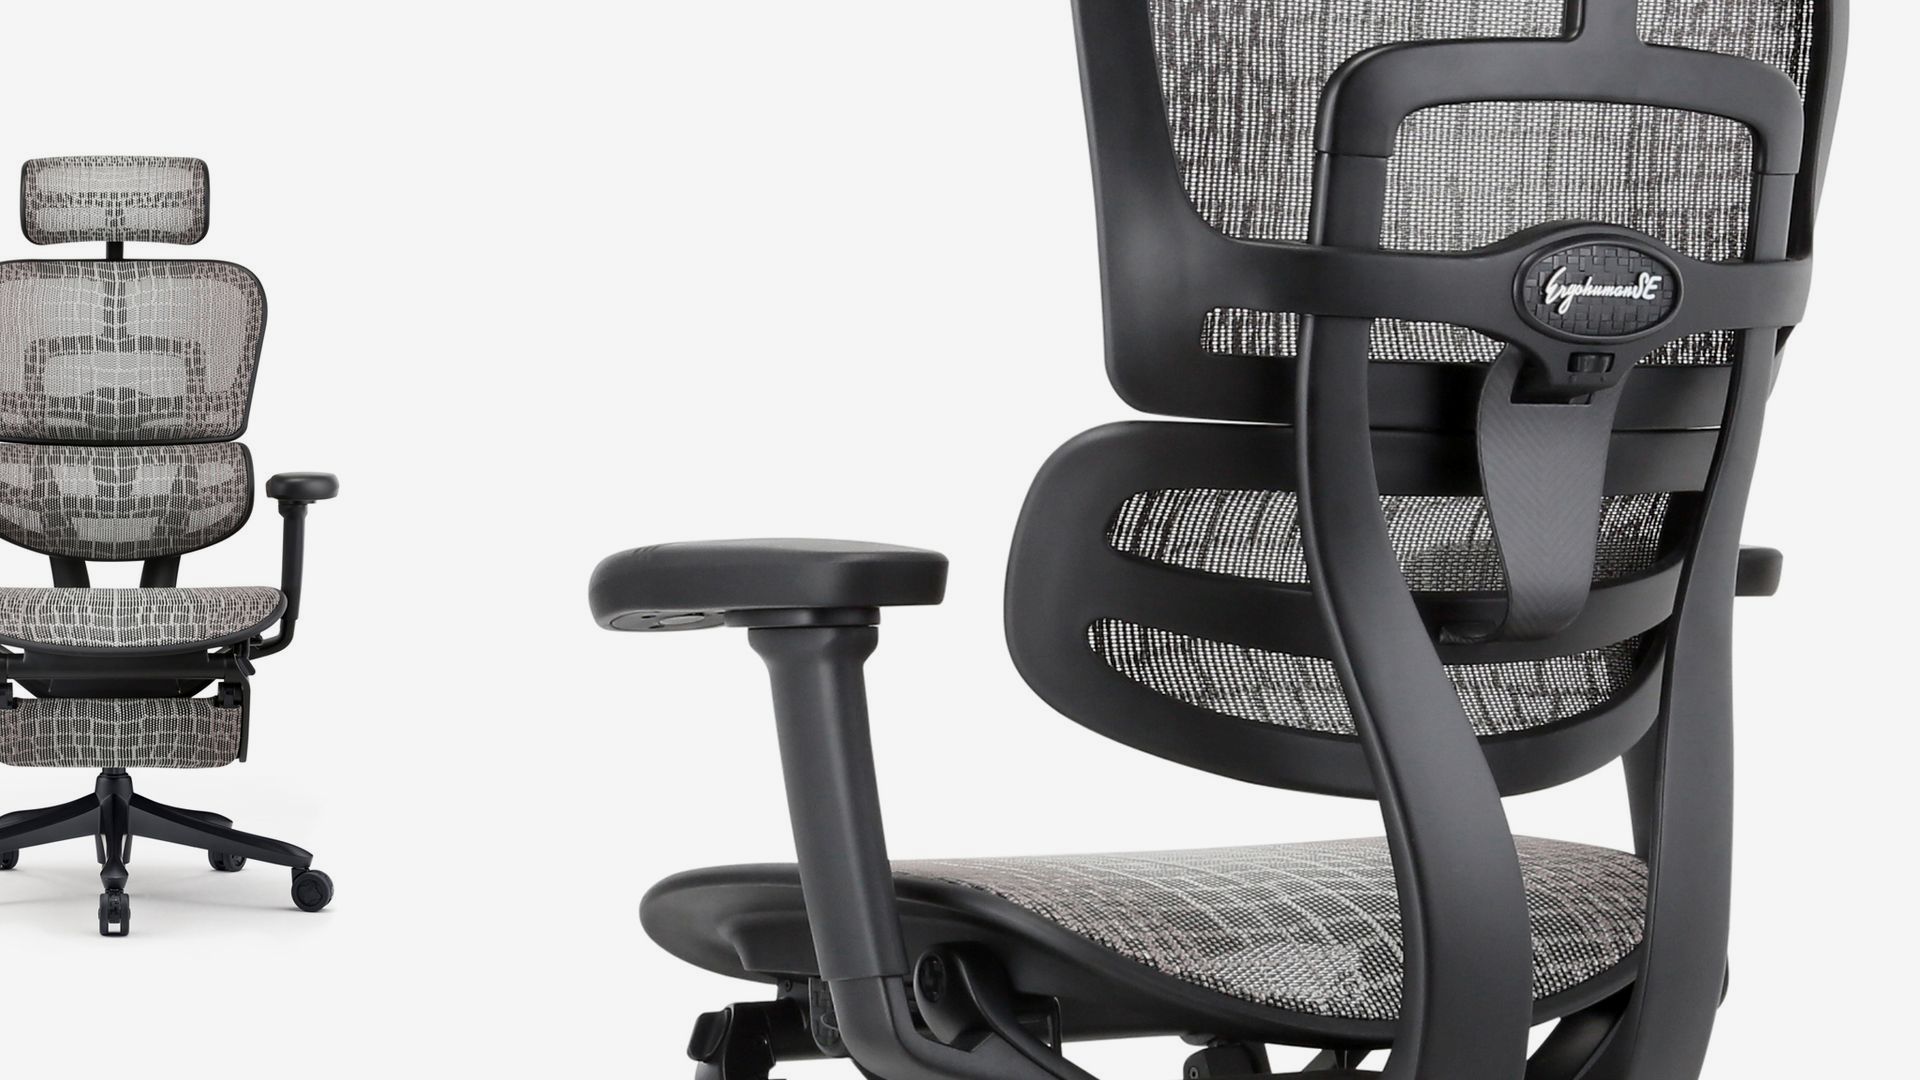 Two Ergohuman Carbon chairs against a white background. One chair is facing at an angle towards the back and the other is facing forward.